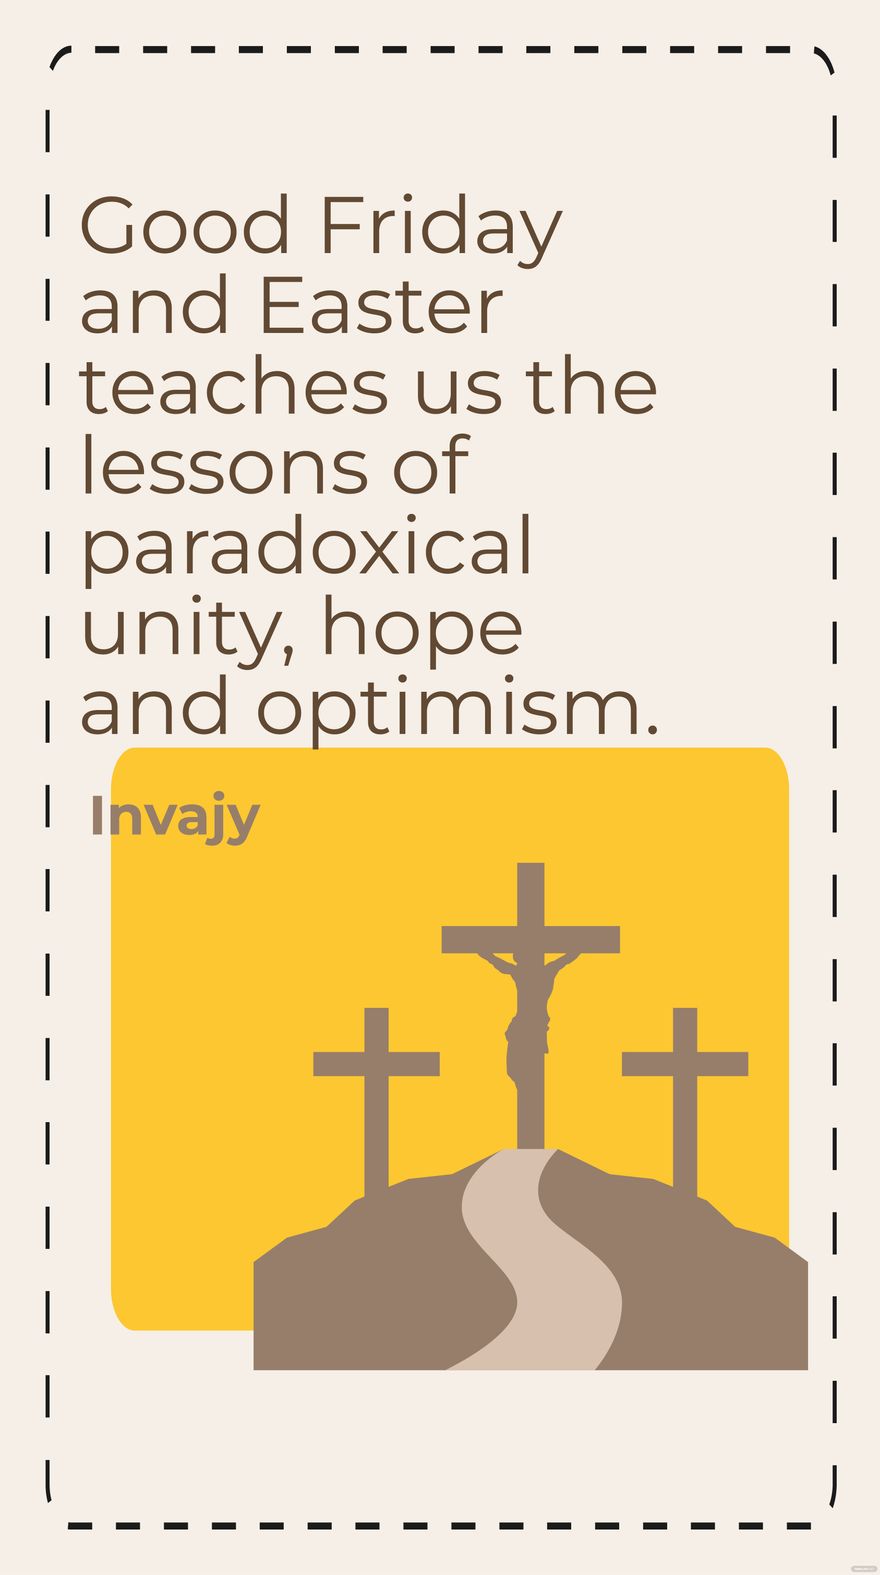 Free Invajy - Good Friday and Easter teaches us the lessons of paradoxical unity, hope and optimism. in JPG